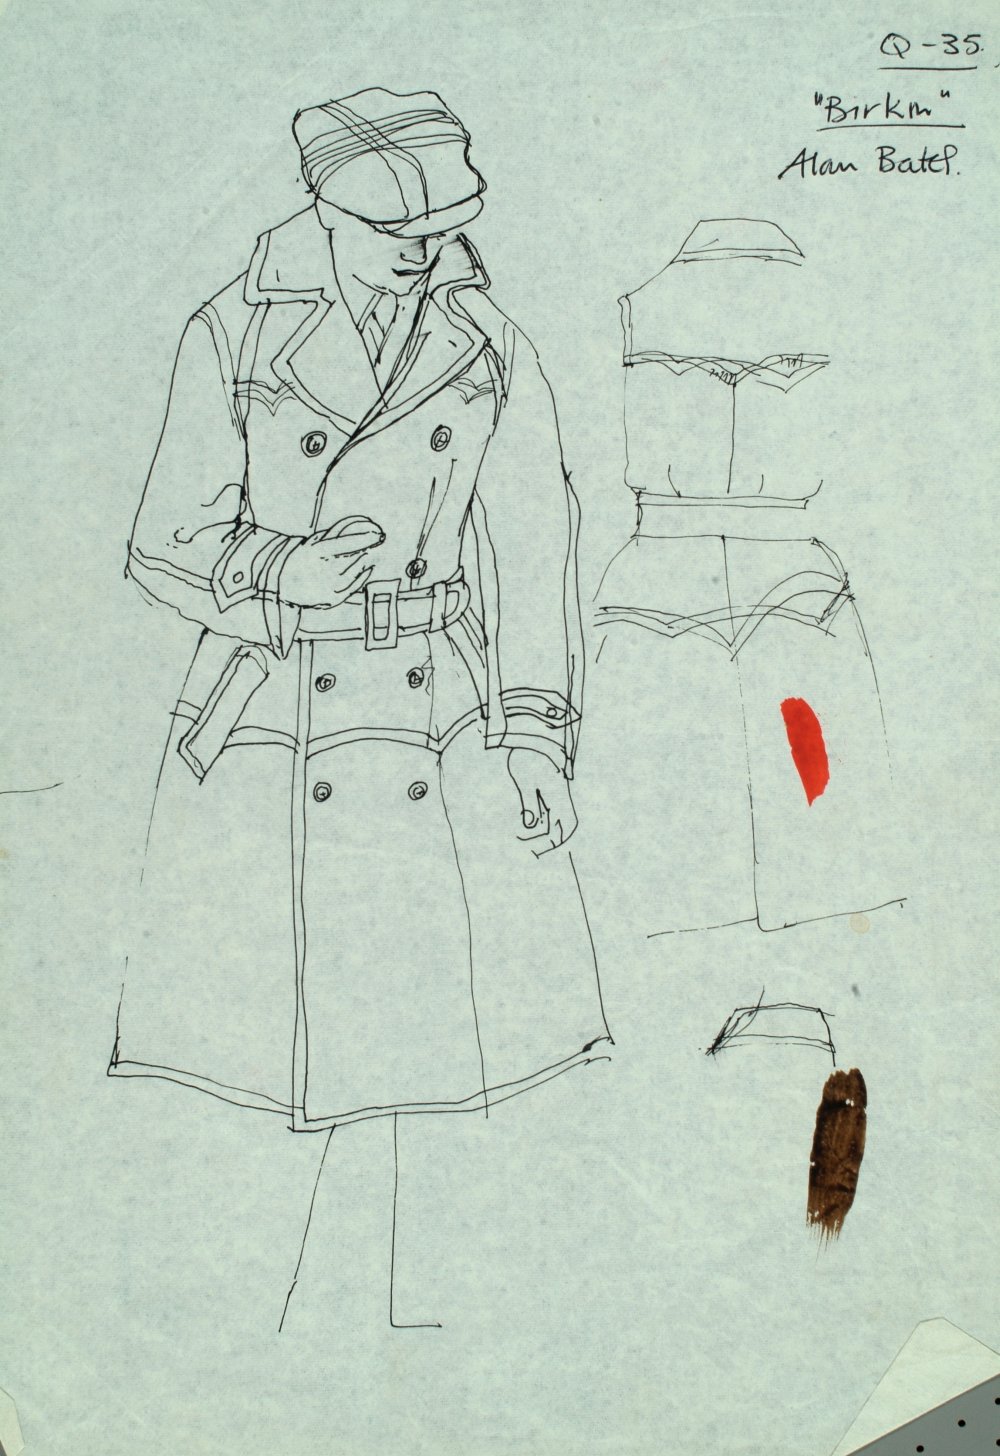 Costume design for Women in Love (1969) by Shirley Russell